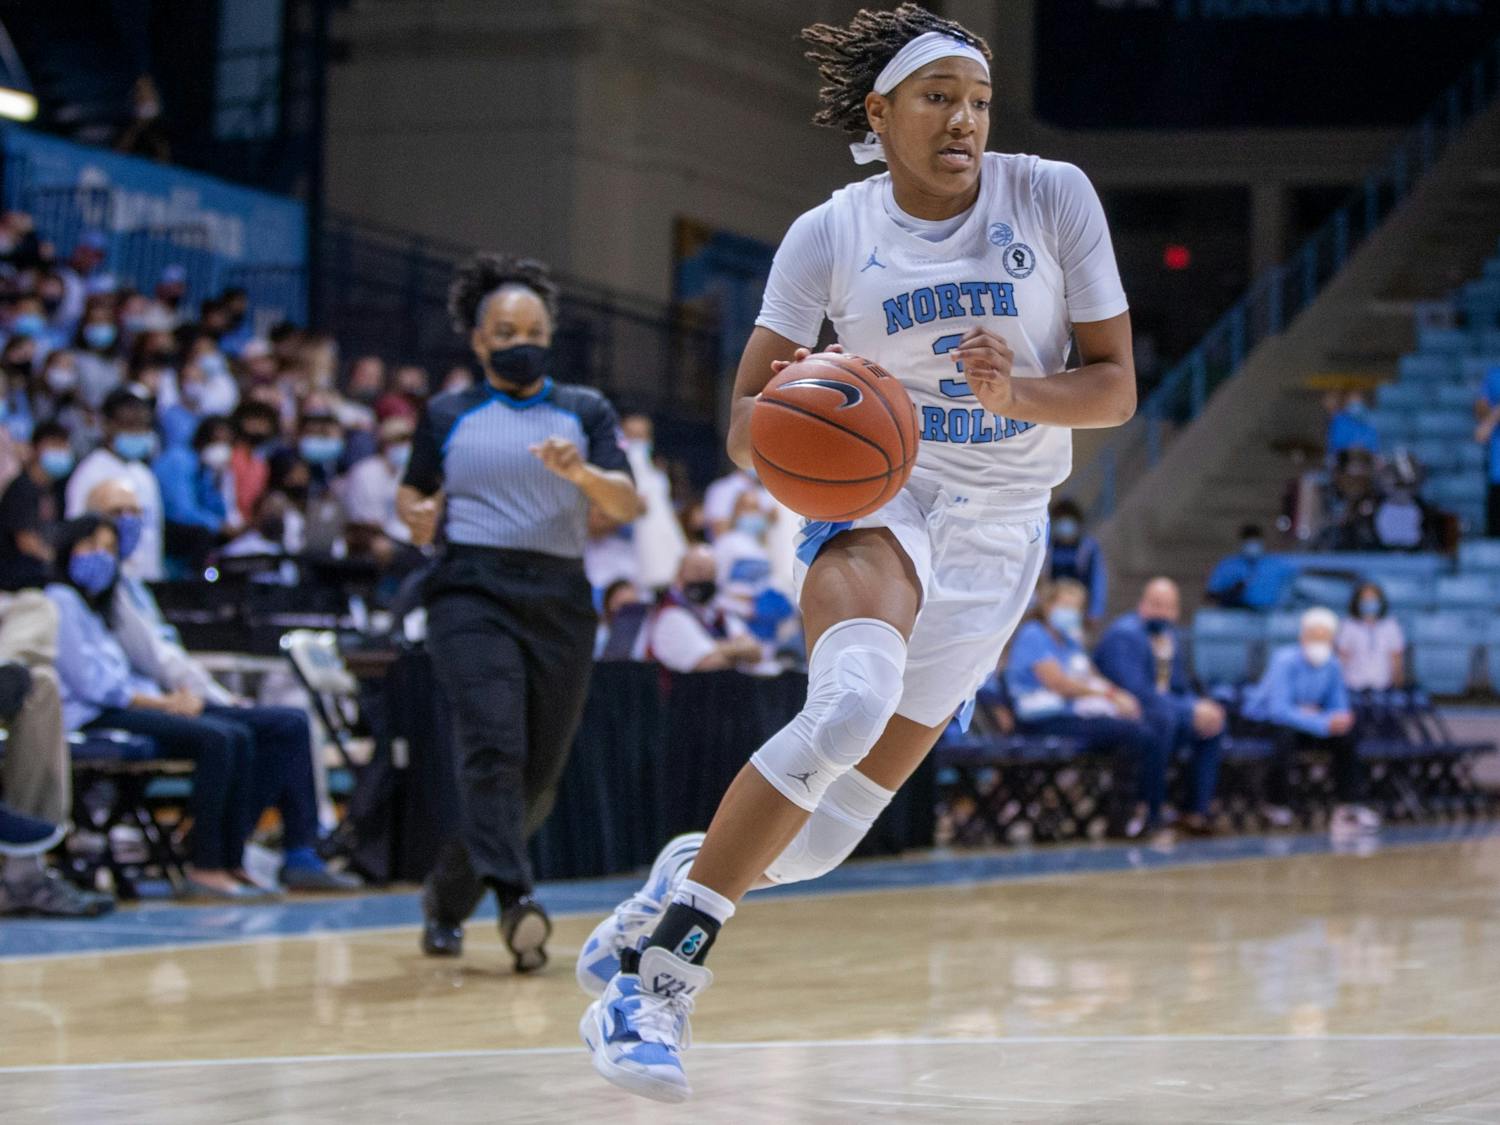 Sophomore guard Kennedy Todd-Williams (3) prepares to shoot at the game against NC A&T on Nov. 9 at Carmichael Arena. UNC won 92-47.